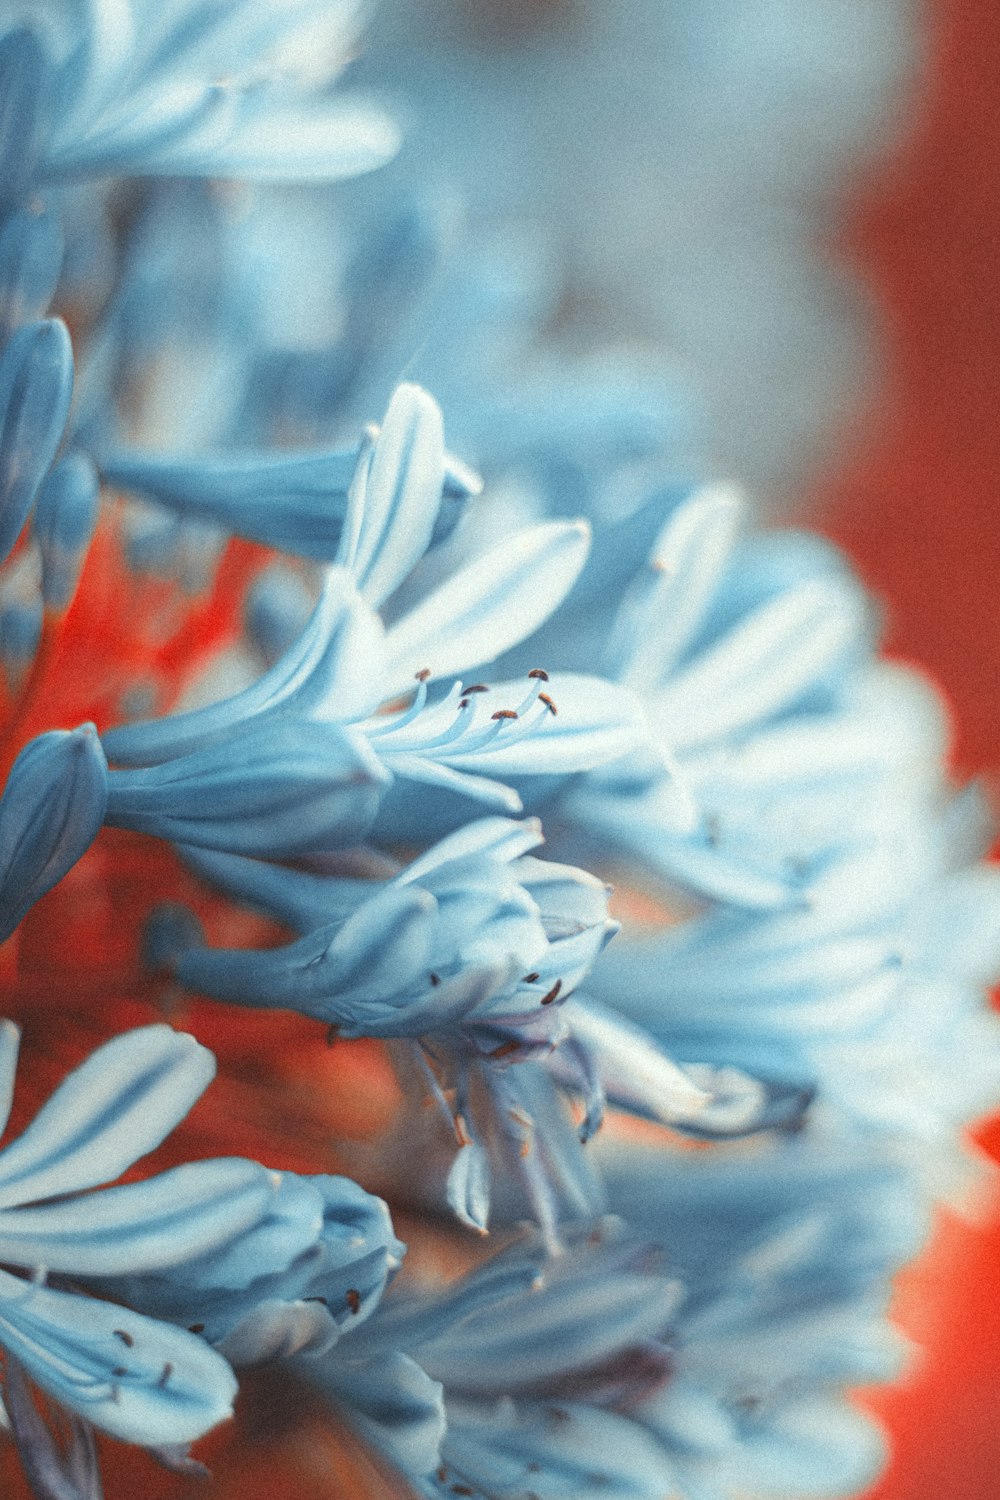 a close up of a blue and white flower